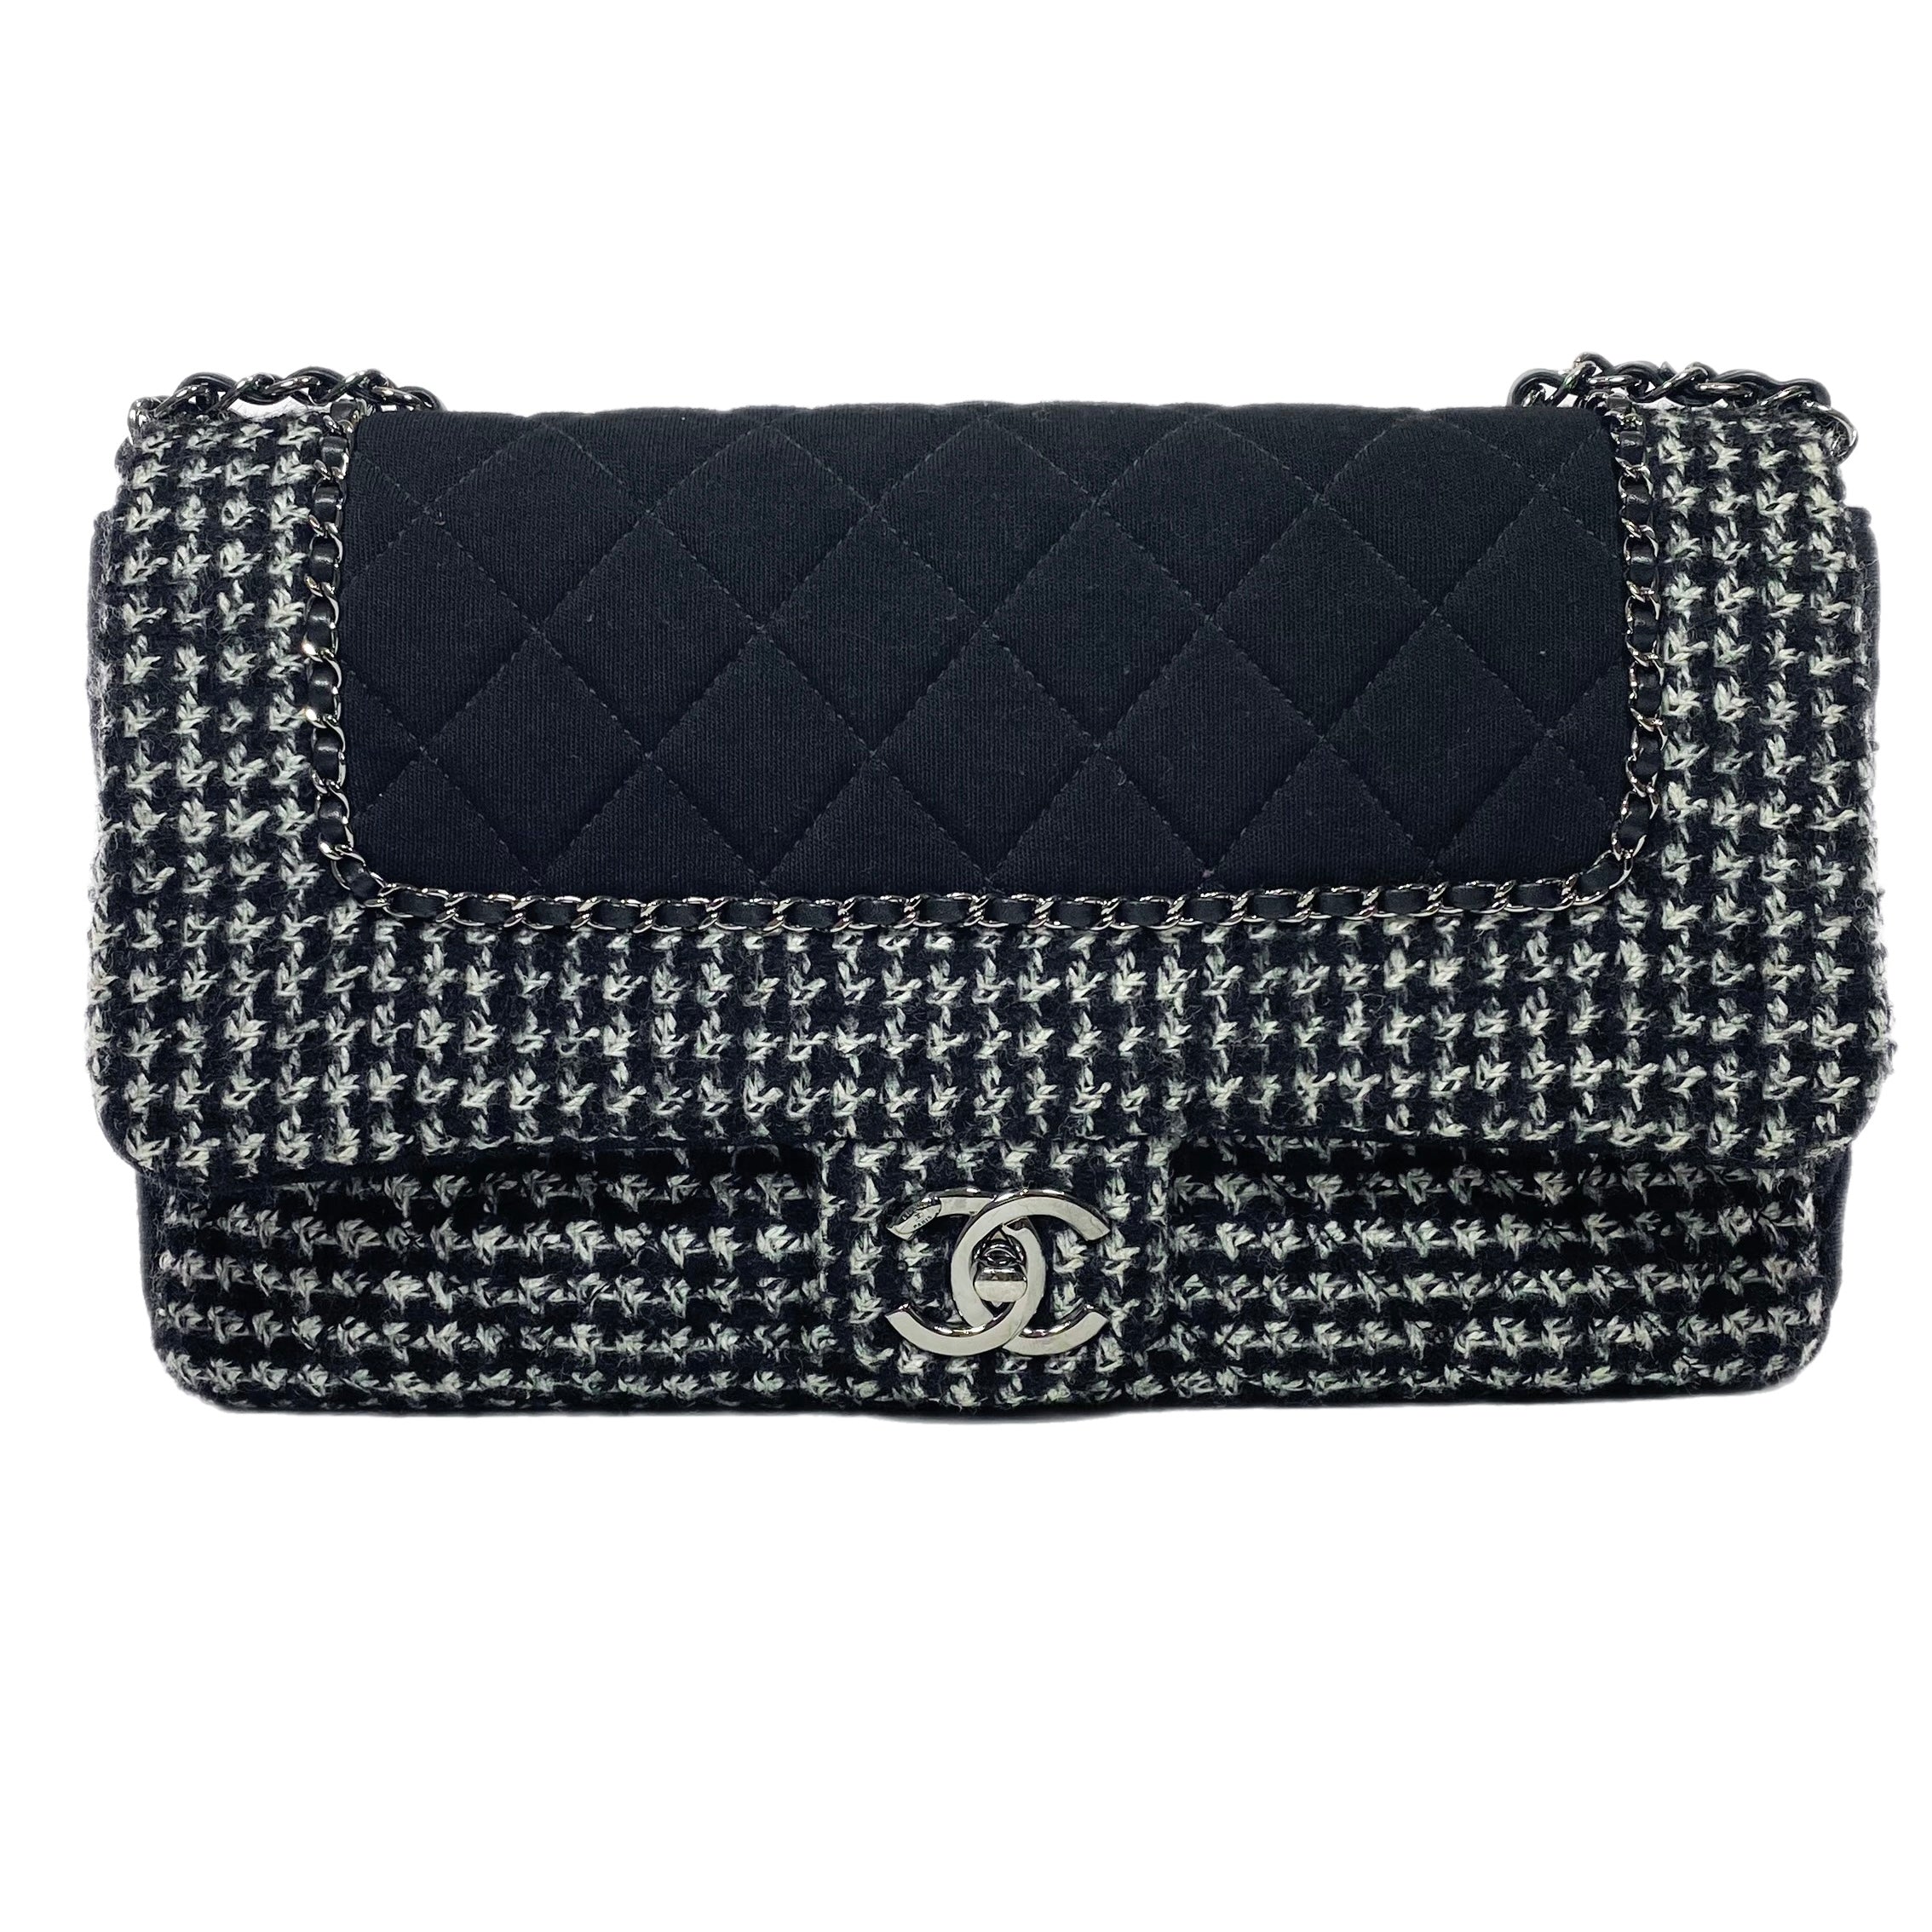 Chanel Black Quilted Tweed Medium Double Flap Bag Silver Hardware